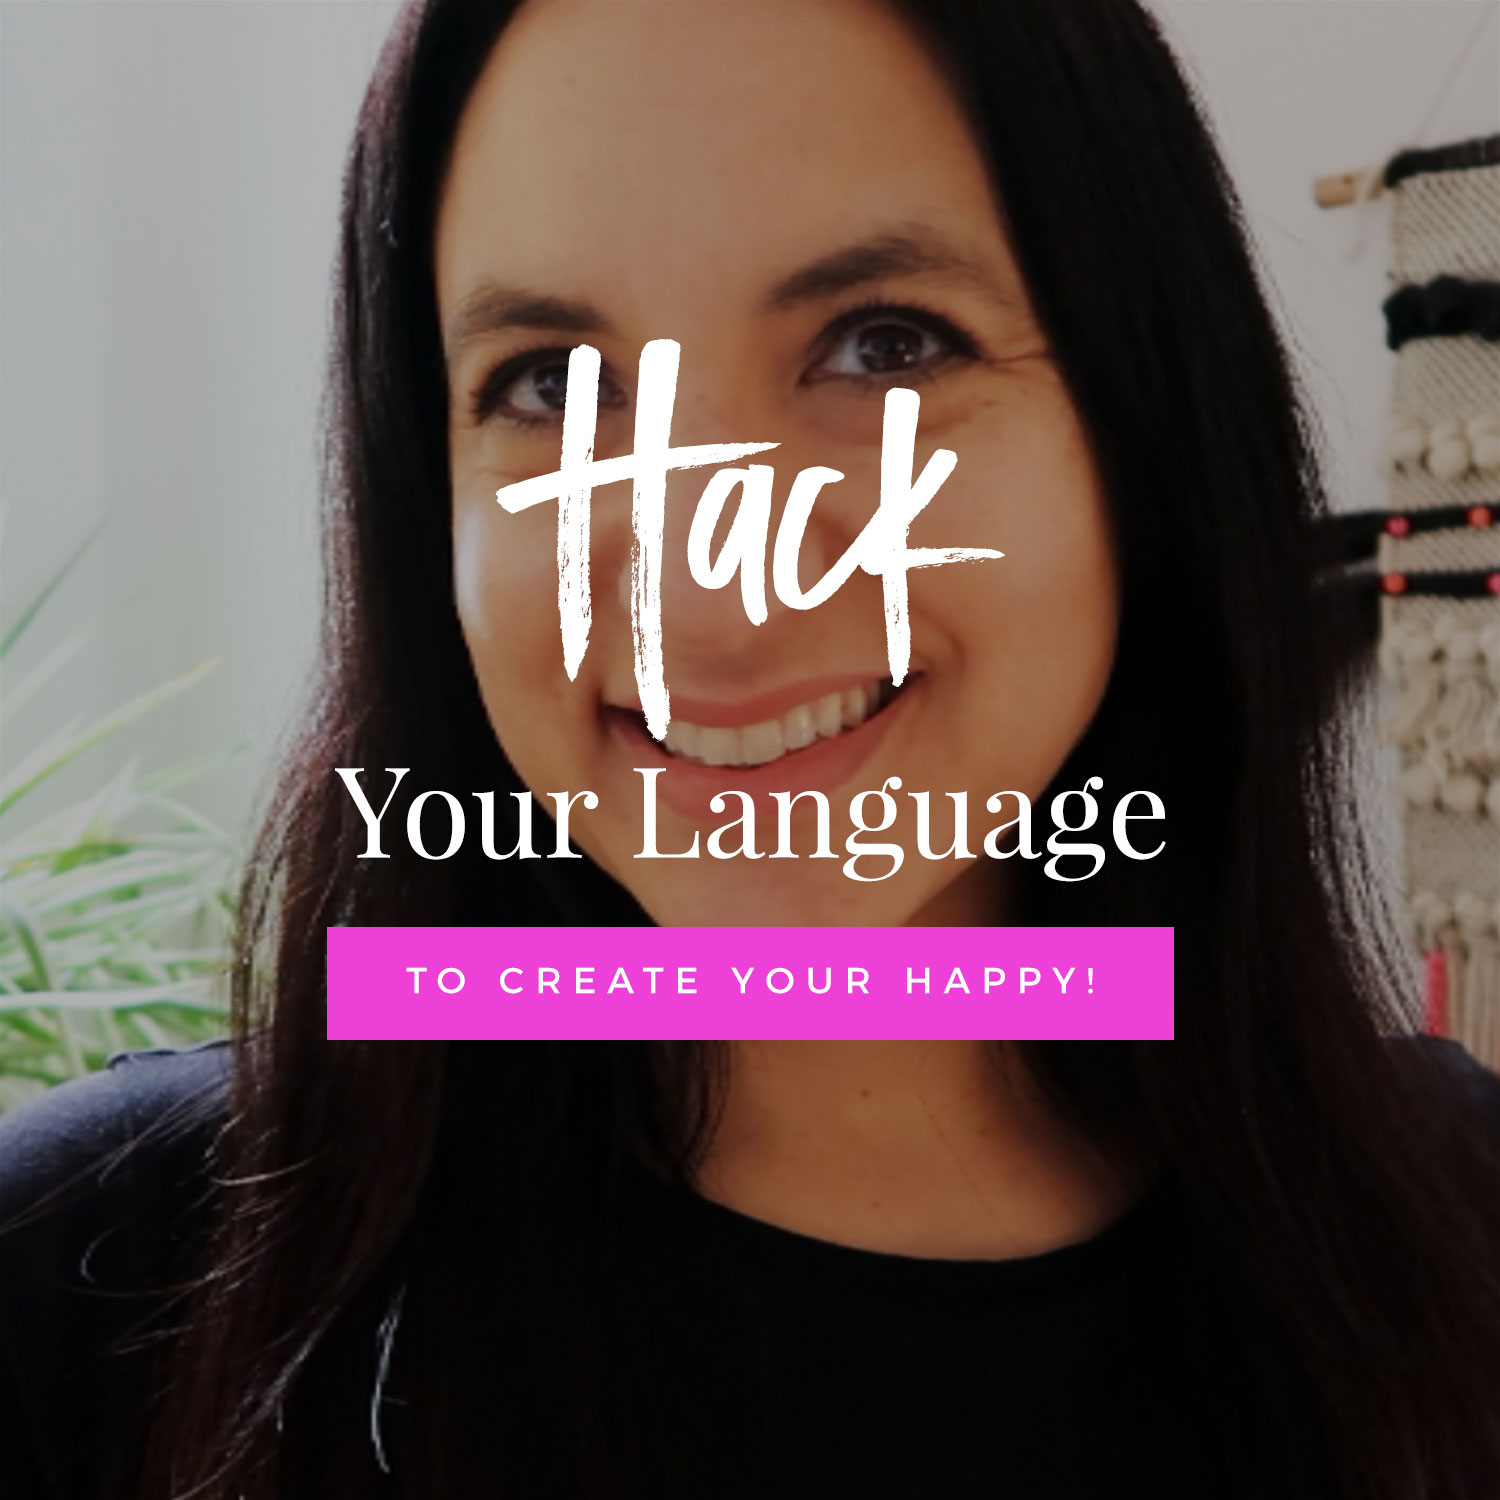 Hack Your Language To Create Your Happy!